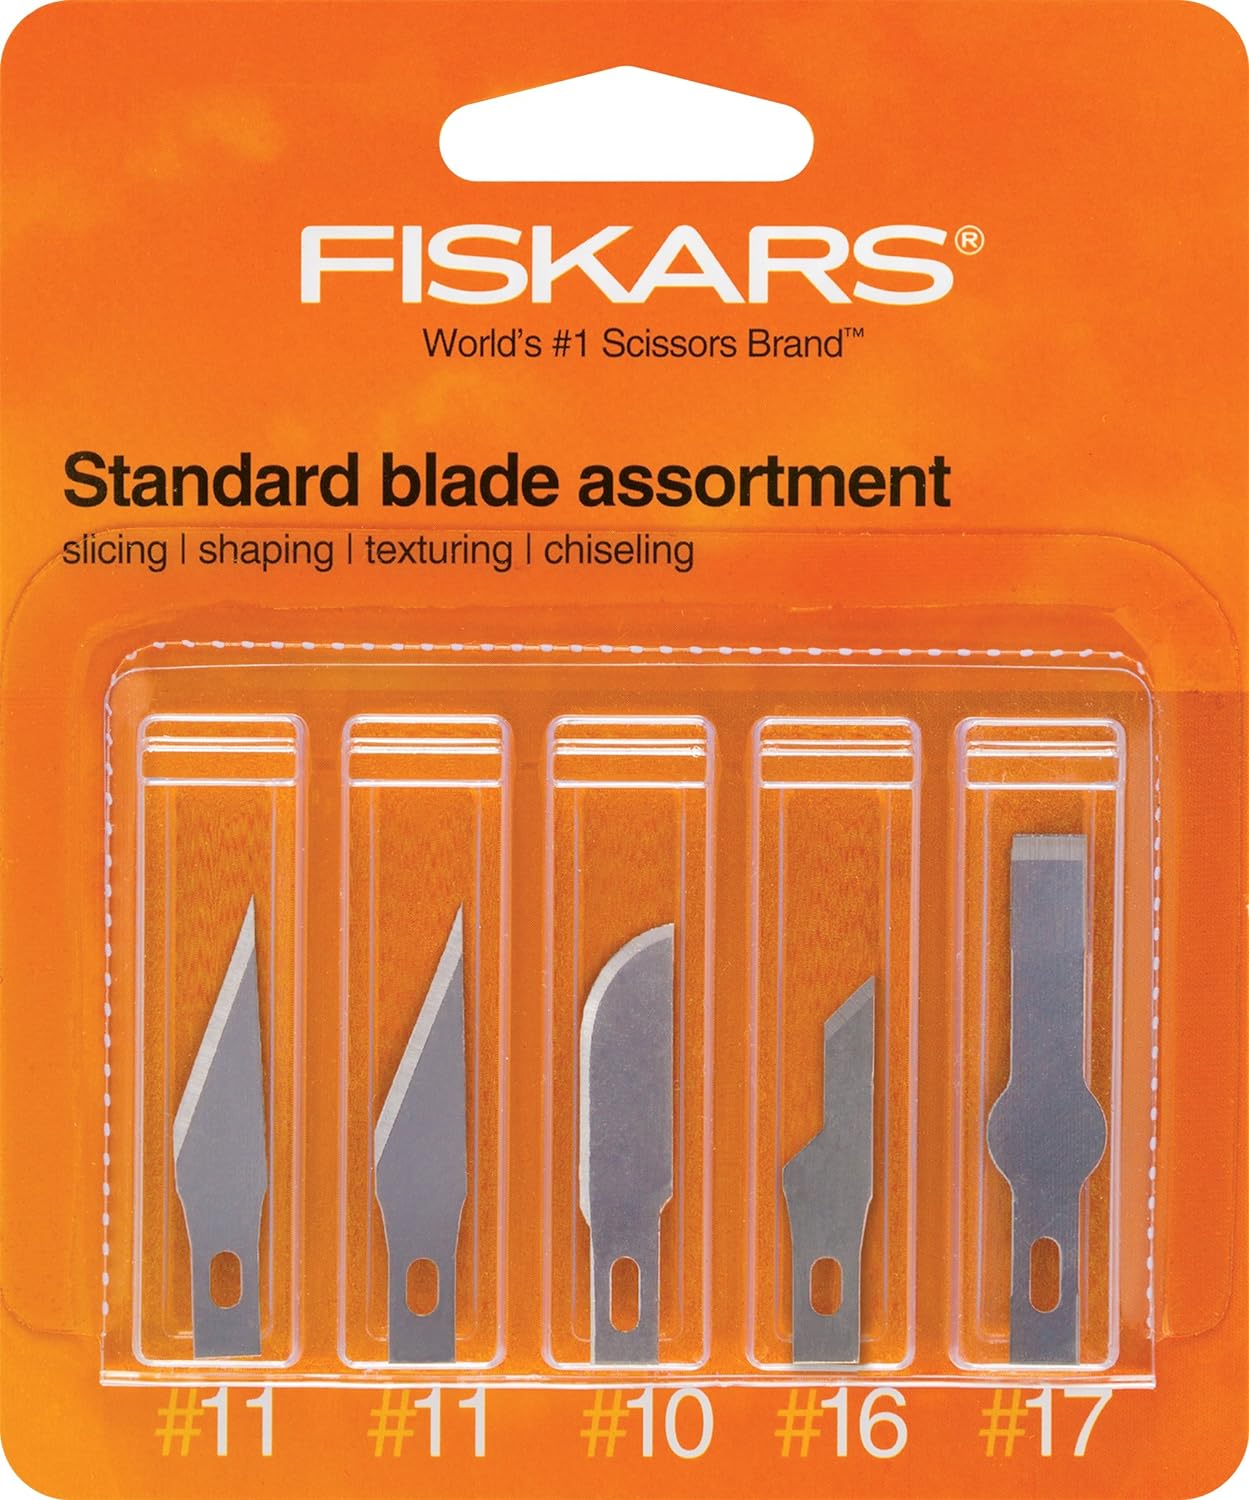 Fiskars Refill Replacement Blades (2xNo.11, 1xNo.10, 1xNo.16, 1xNo.17) Assorted Pack of 5